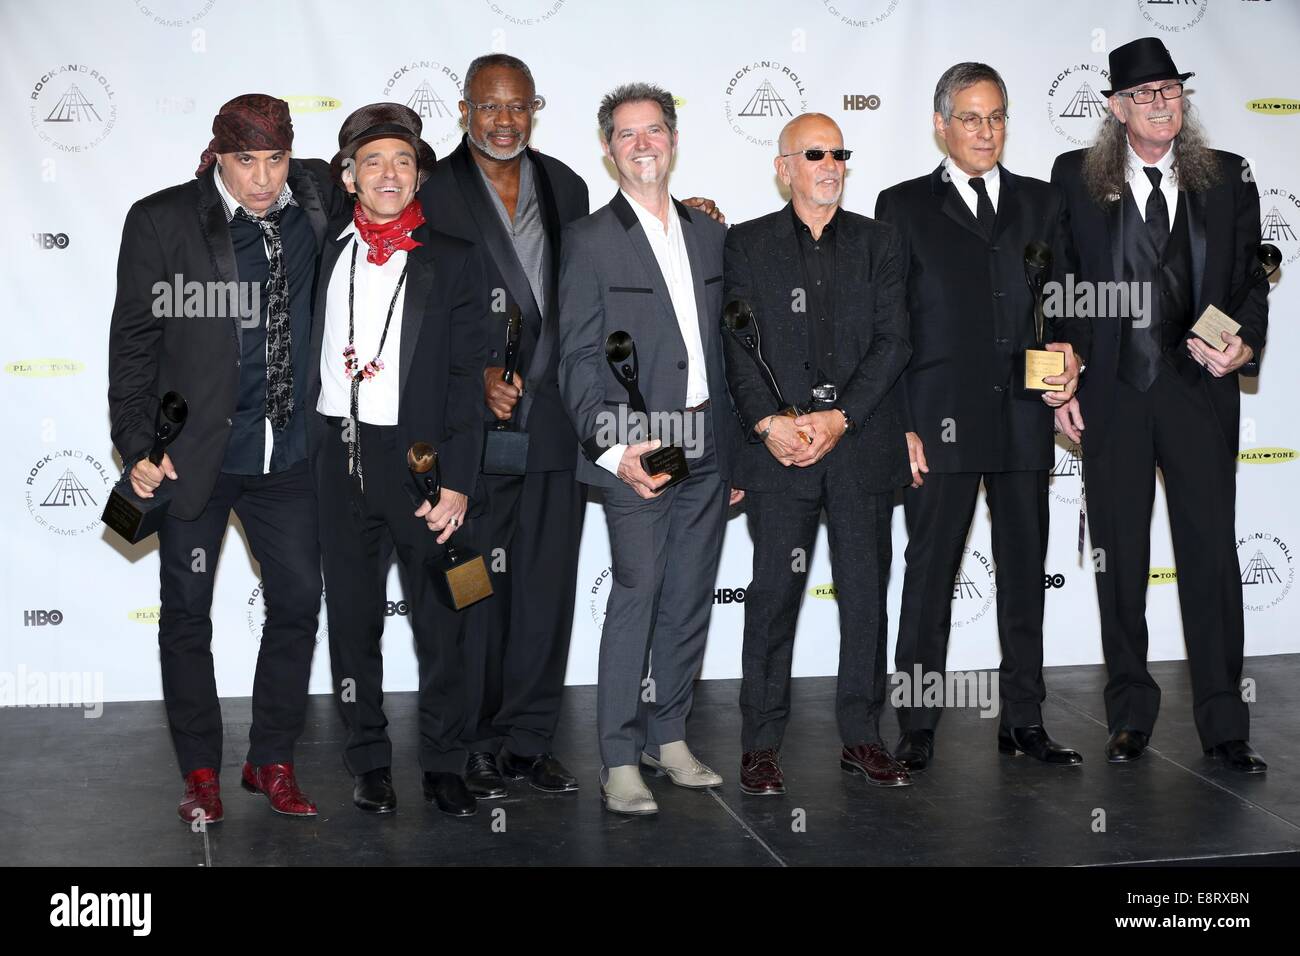 the 29th Annual Rock And Roll Hall Of Fame Induction Ceremony at Barclays Center of Brooklyn on April 10, 2014 in New York City.  Featuring: Steven Van Zandt,Nils Lofgren,David Sancious,Garry Tallent,Roy Bittan,Max Weinberg and Vini Lopez Where: New York, New York, United States When: 11 Apr 2014 Stock Photo